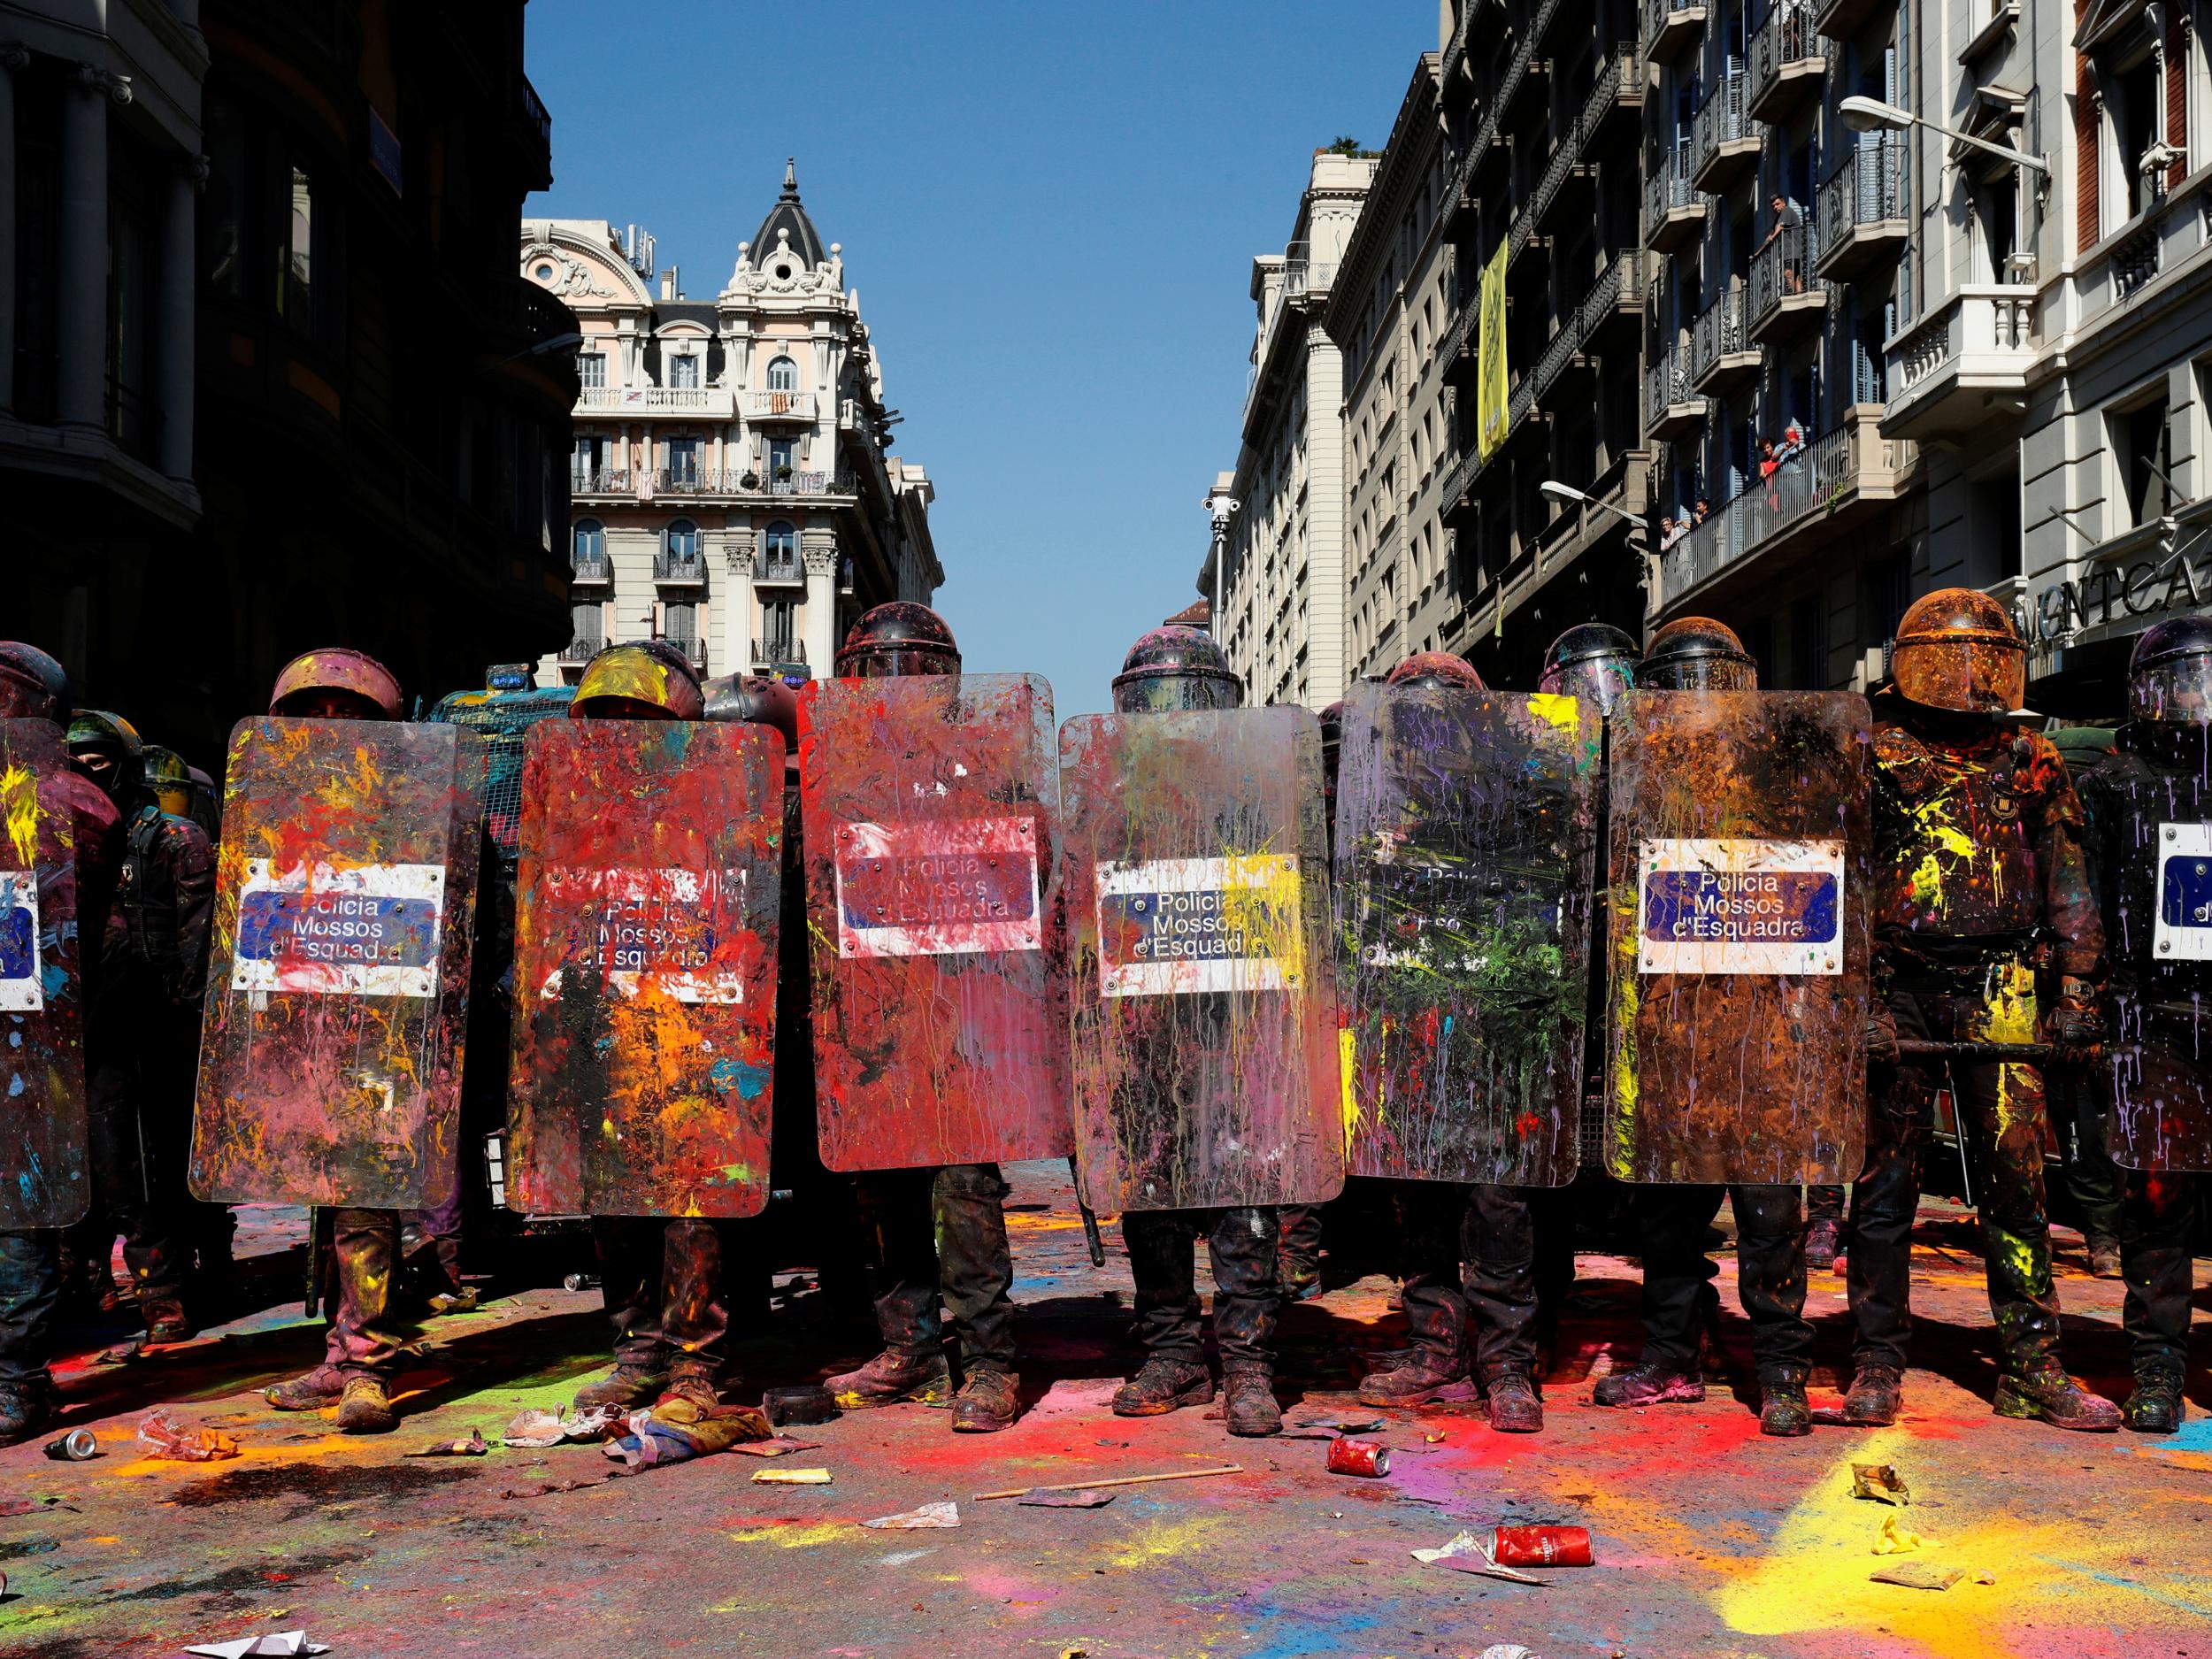 Police officers in Barcelona on Saturday at a protest by separatists